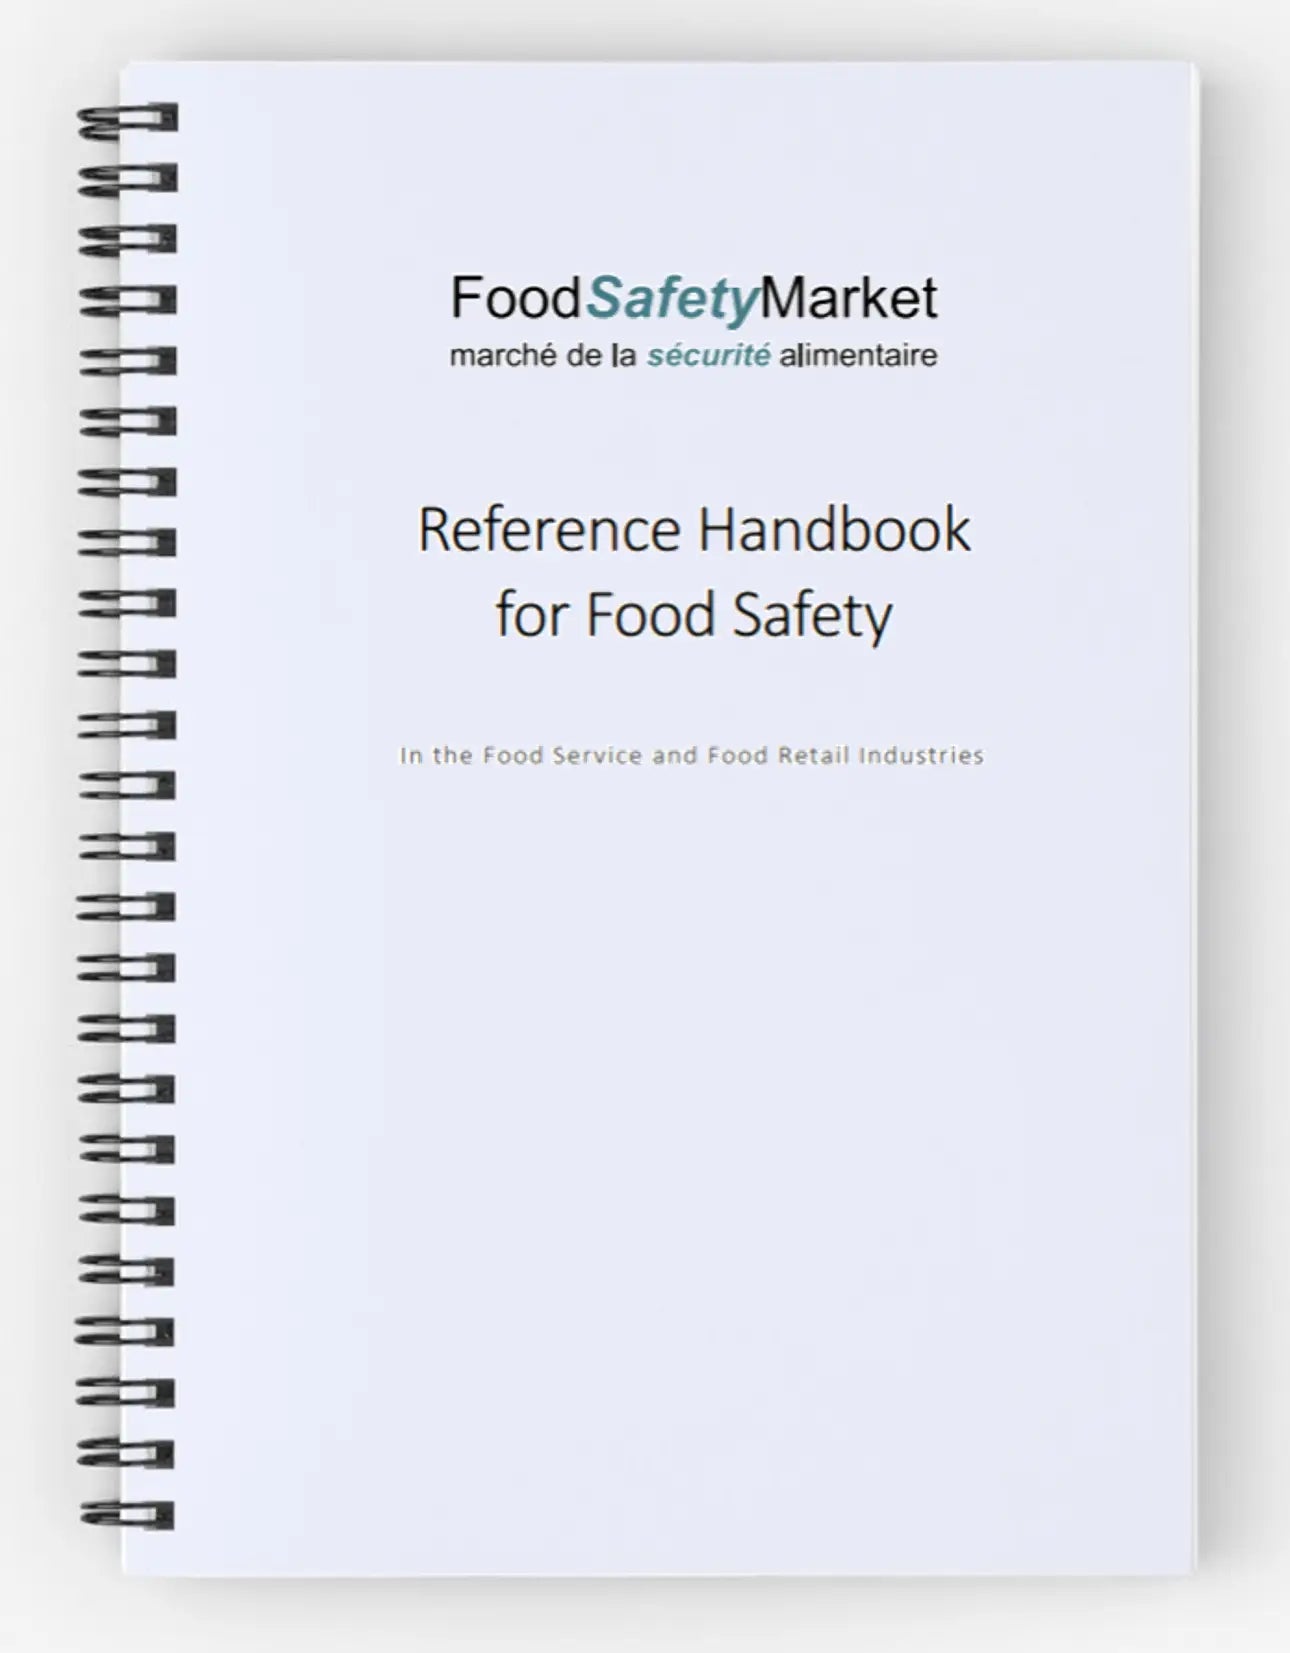 Reference Handbook for Food Safety